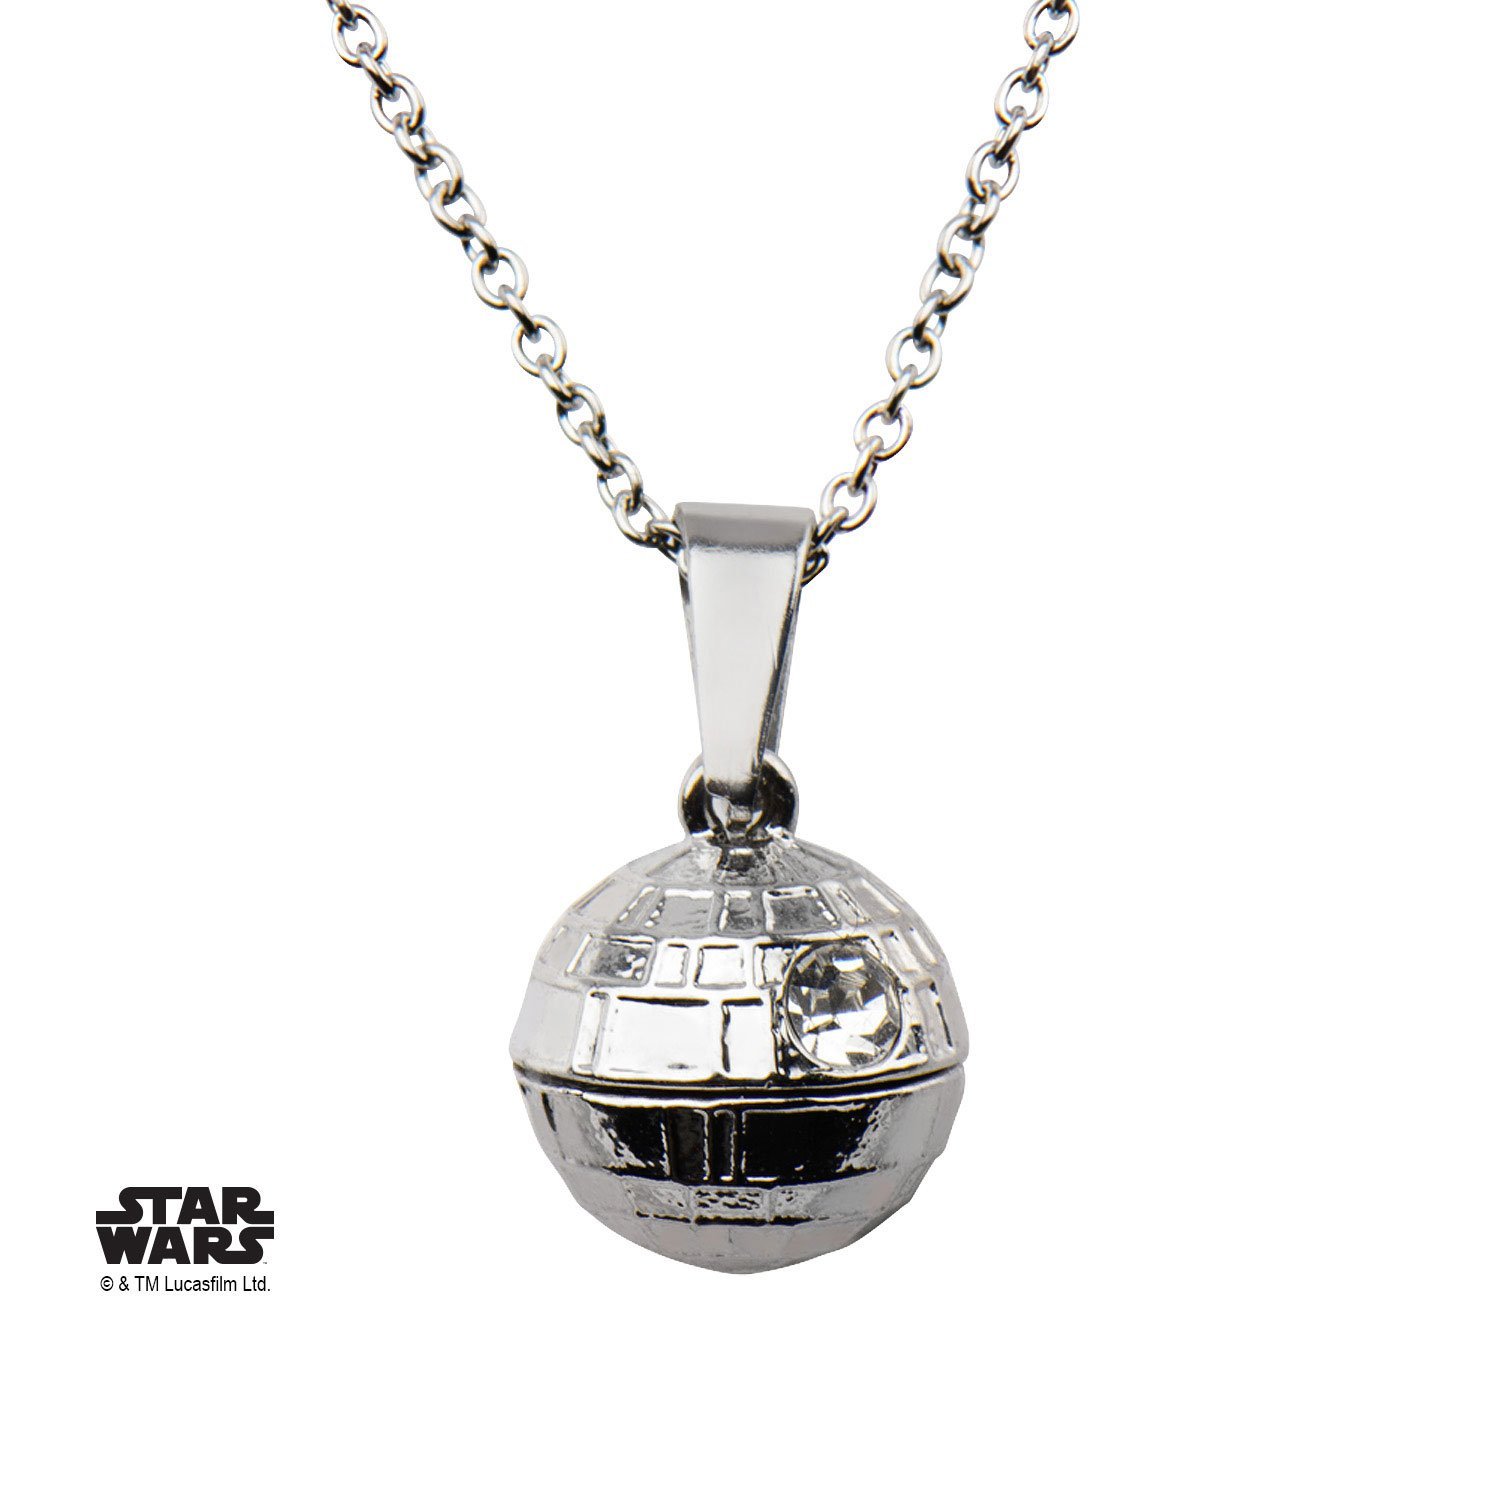 Leia's List - Death Star Necklaces - The Kessel Runway